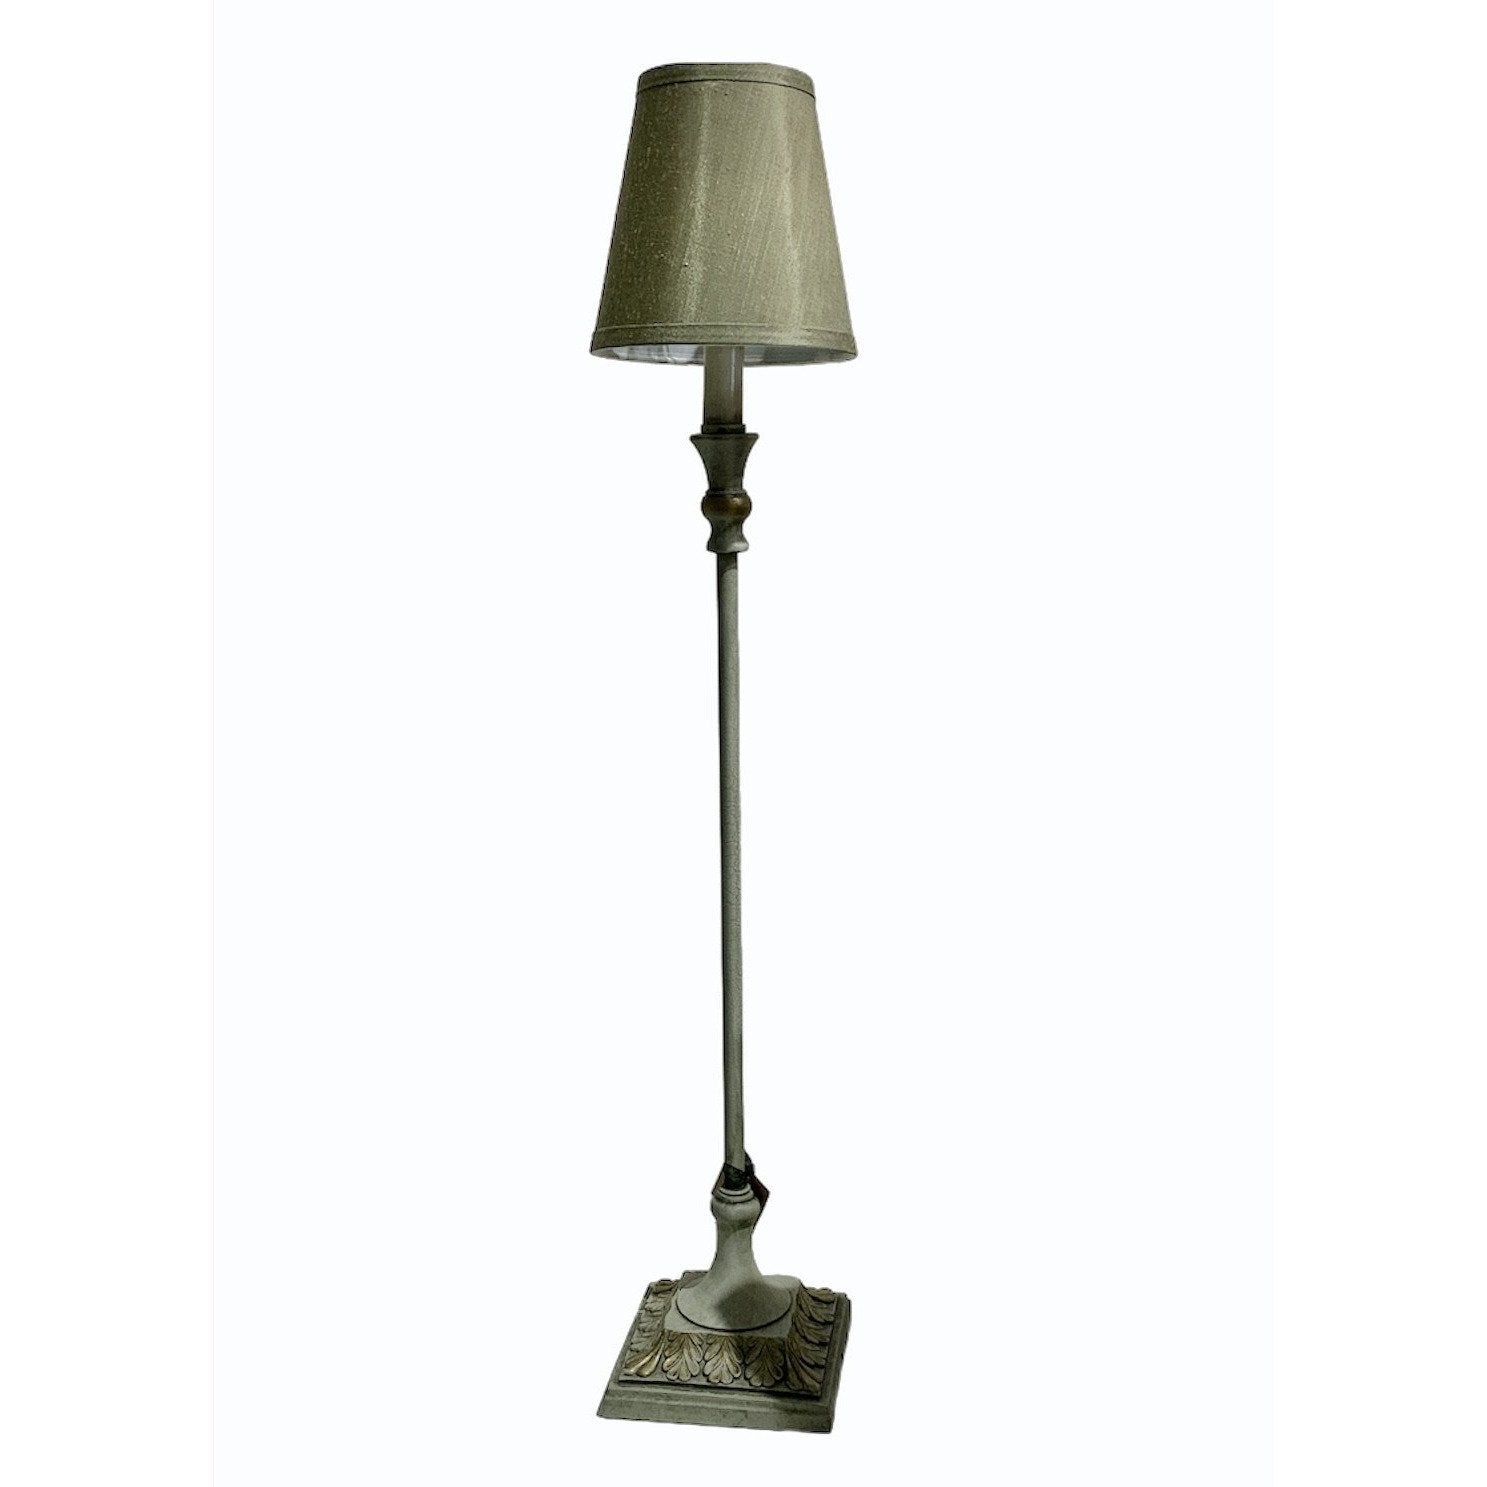 French Country Table Lamp